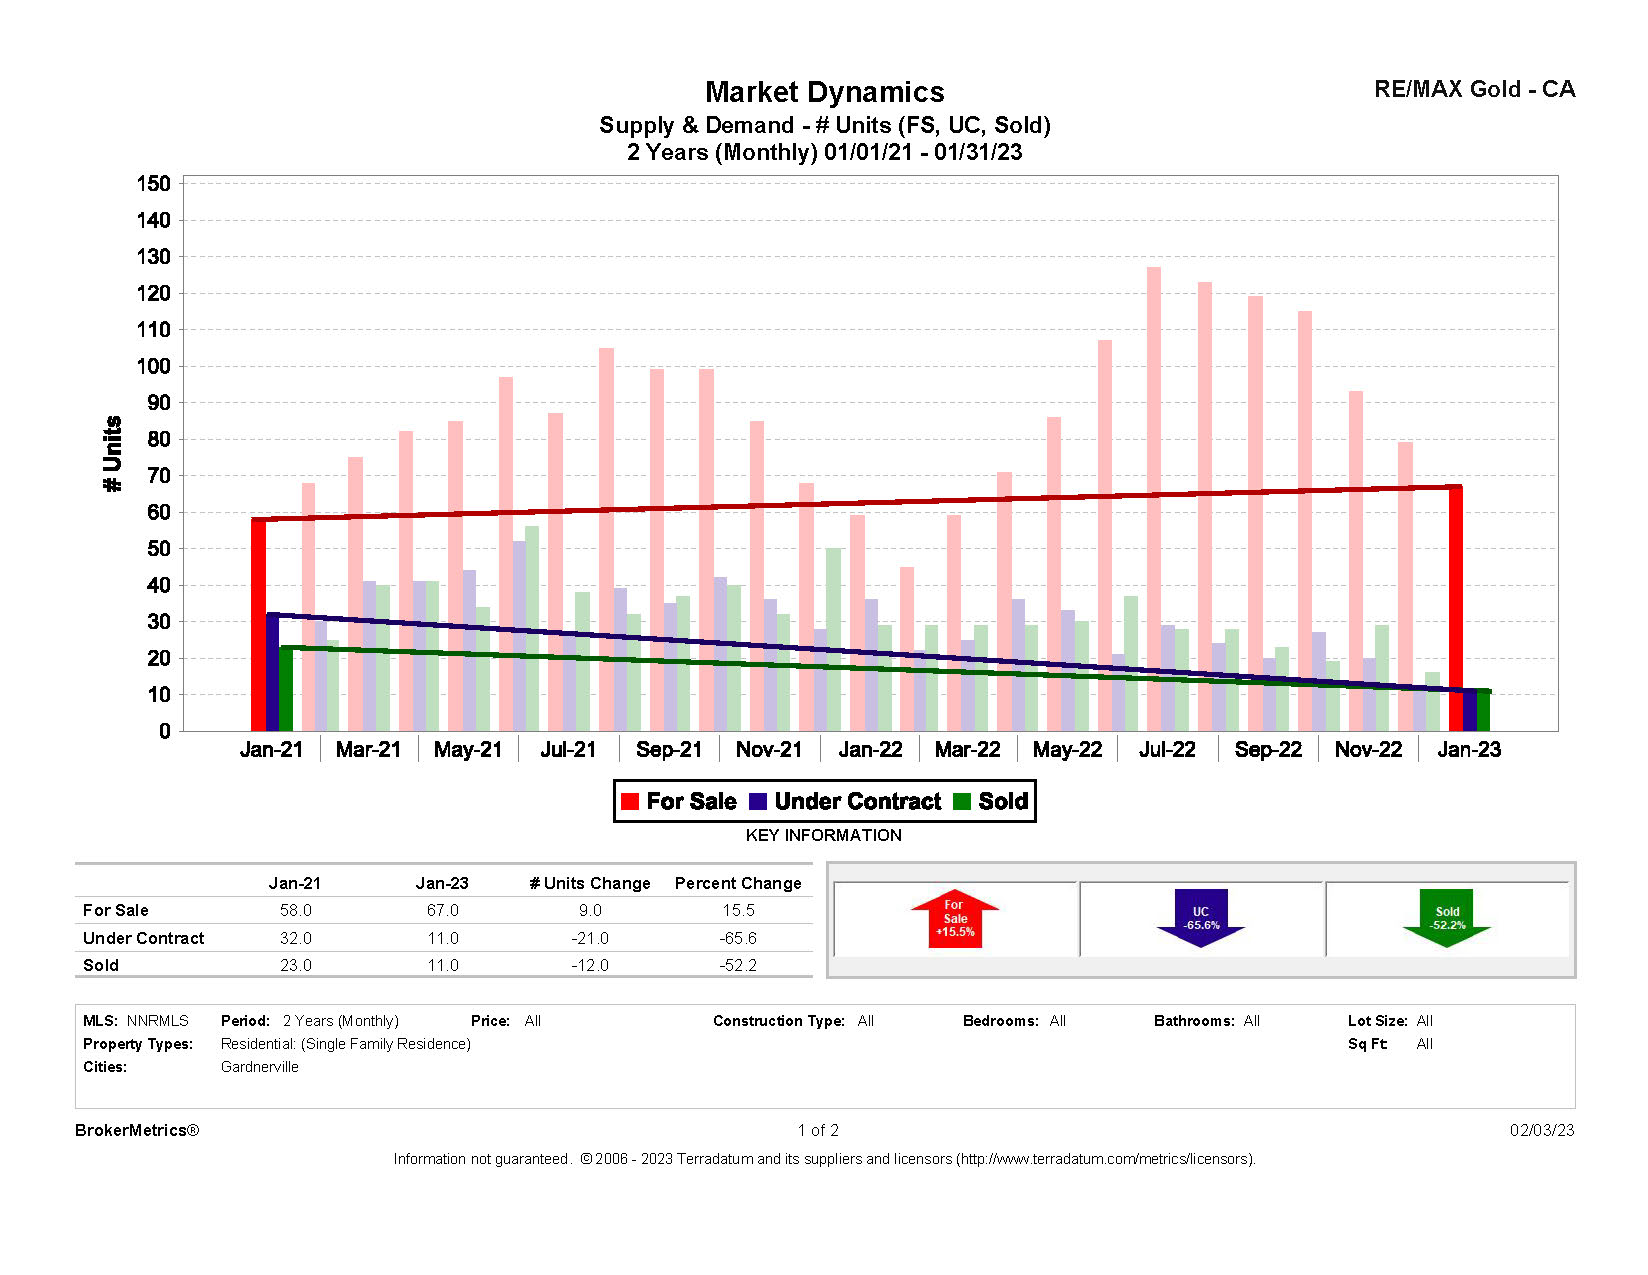 January 2023 Residential Stats: Supply & Demand graph for Gardnerville, NV